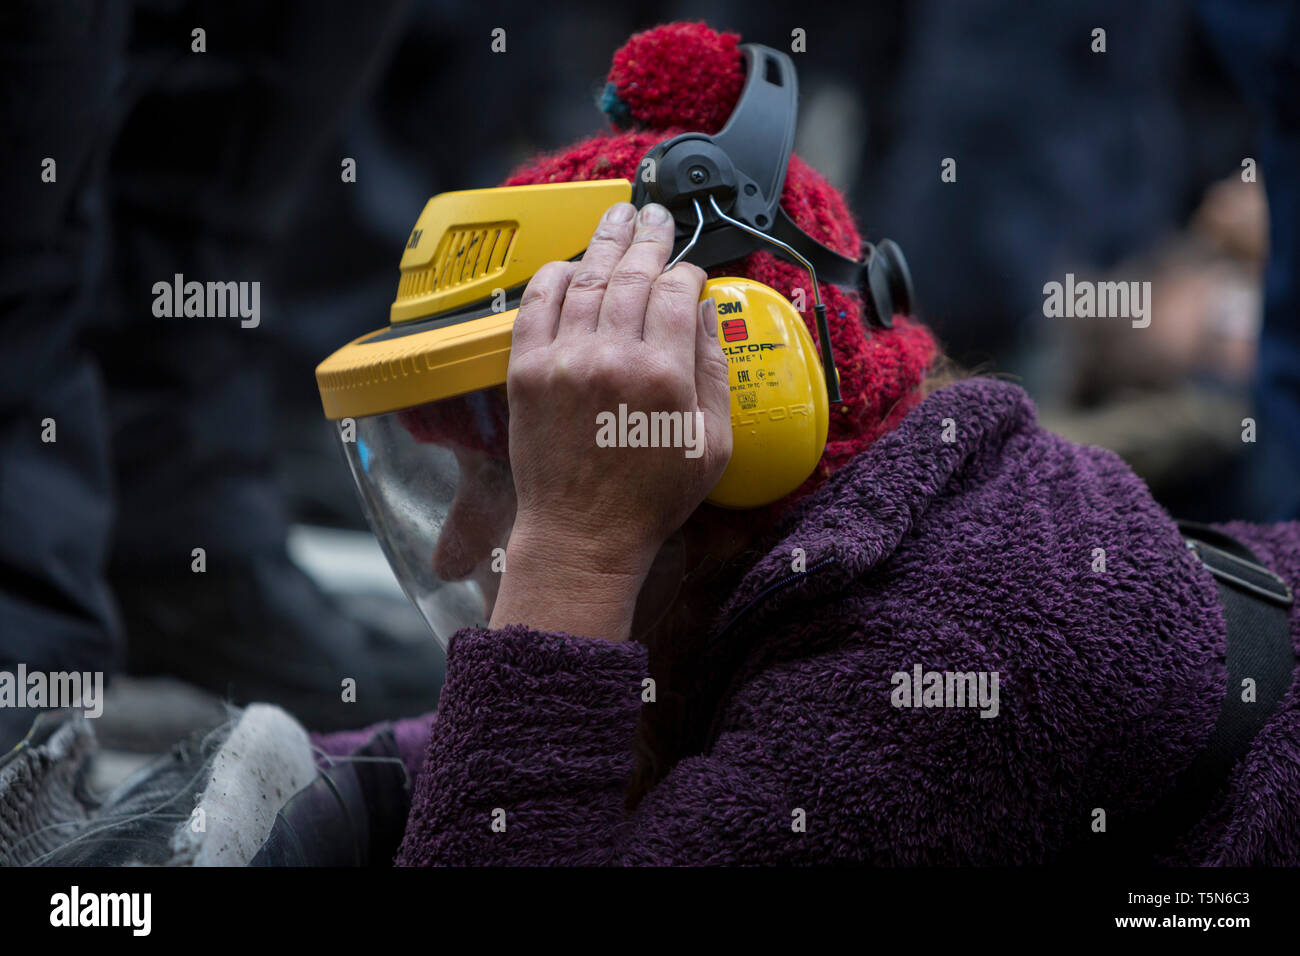 An environmental protester wears a protective helmet issued by police before a grinder is used to saw through chains on the road in Fleet Street on the 11th and final day of protests, road-blockages and arrests across London by the climate change campaign Extinction Rebellion, on 25th April 2019, in London, England. Stock Photo